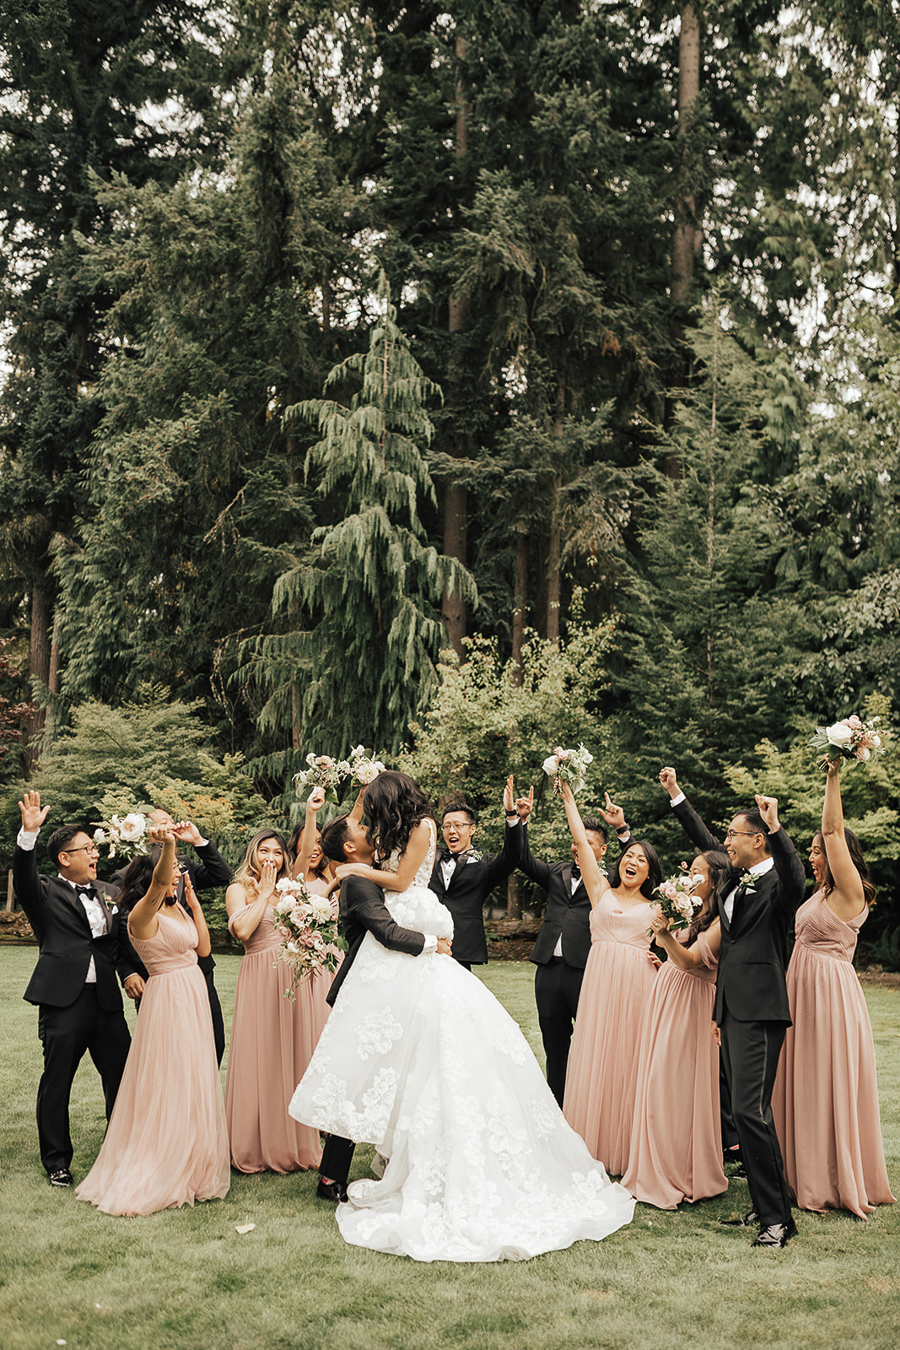 8 poses to take with your wedding party - wedding party cheers while bride and groom kiss